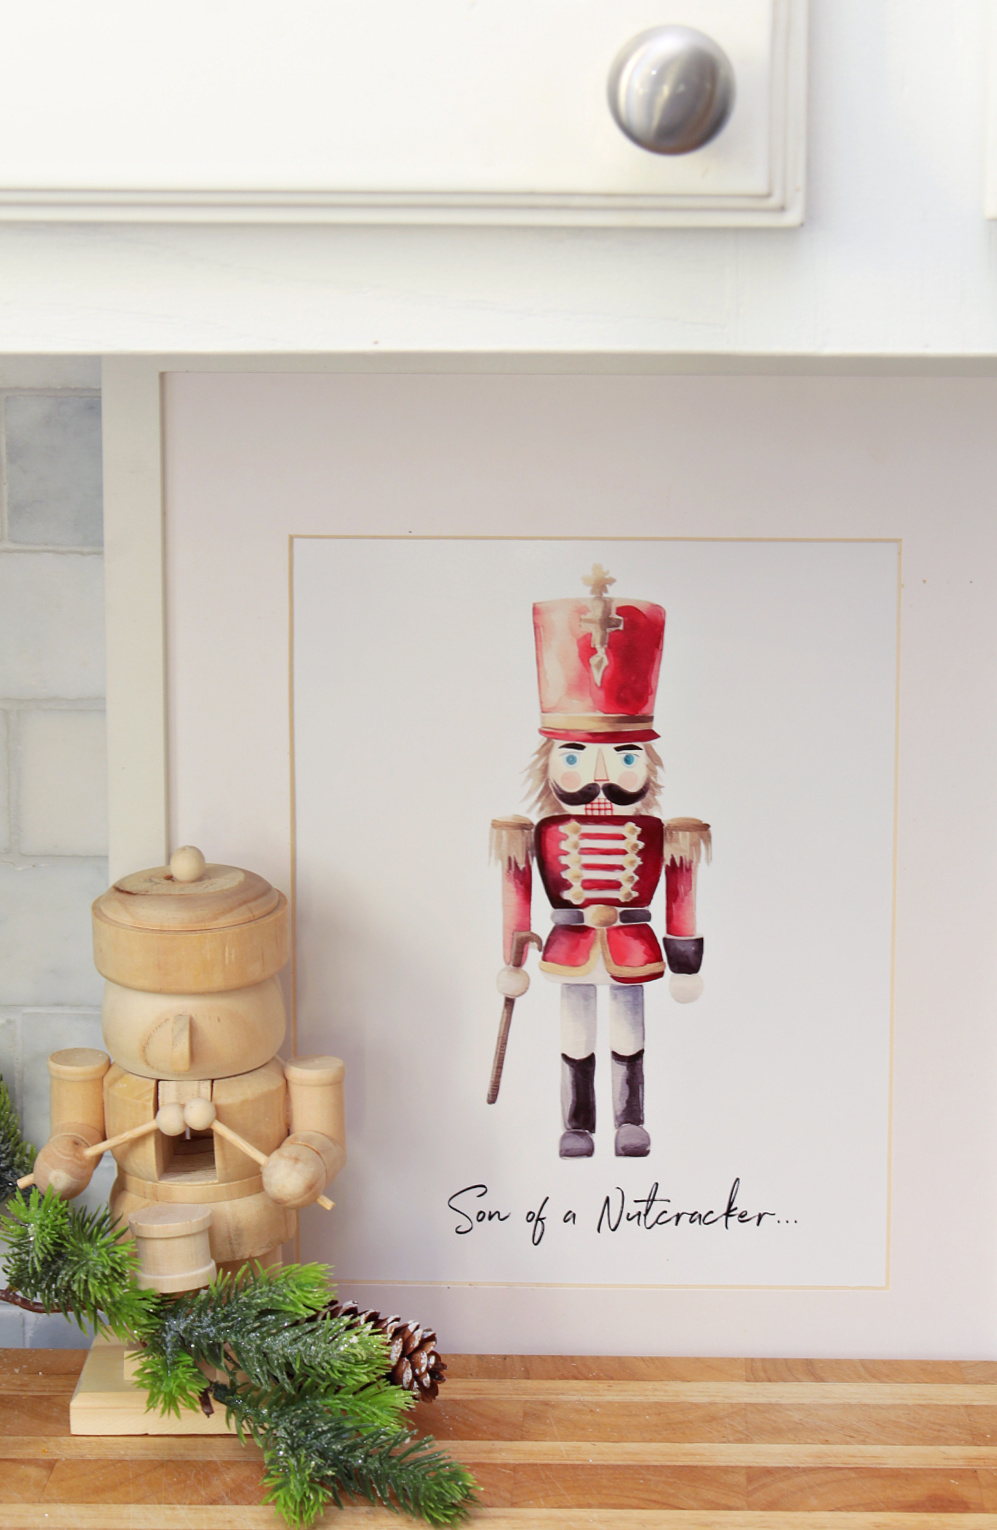 Free Nutcracker Christmas printables with "Son of a Nutcracker" quote from Elf.